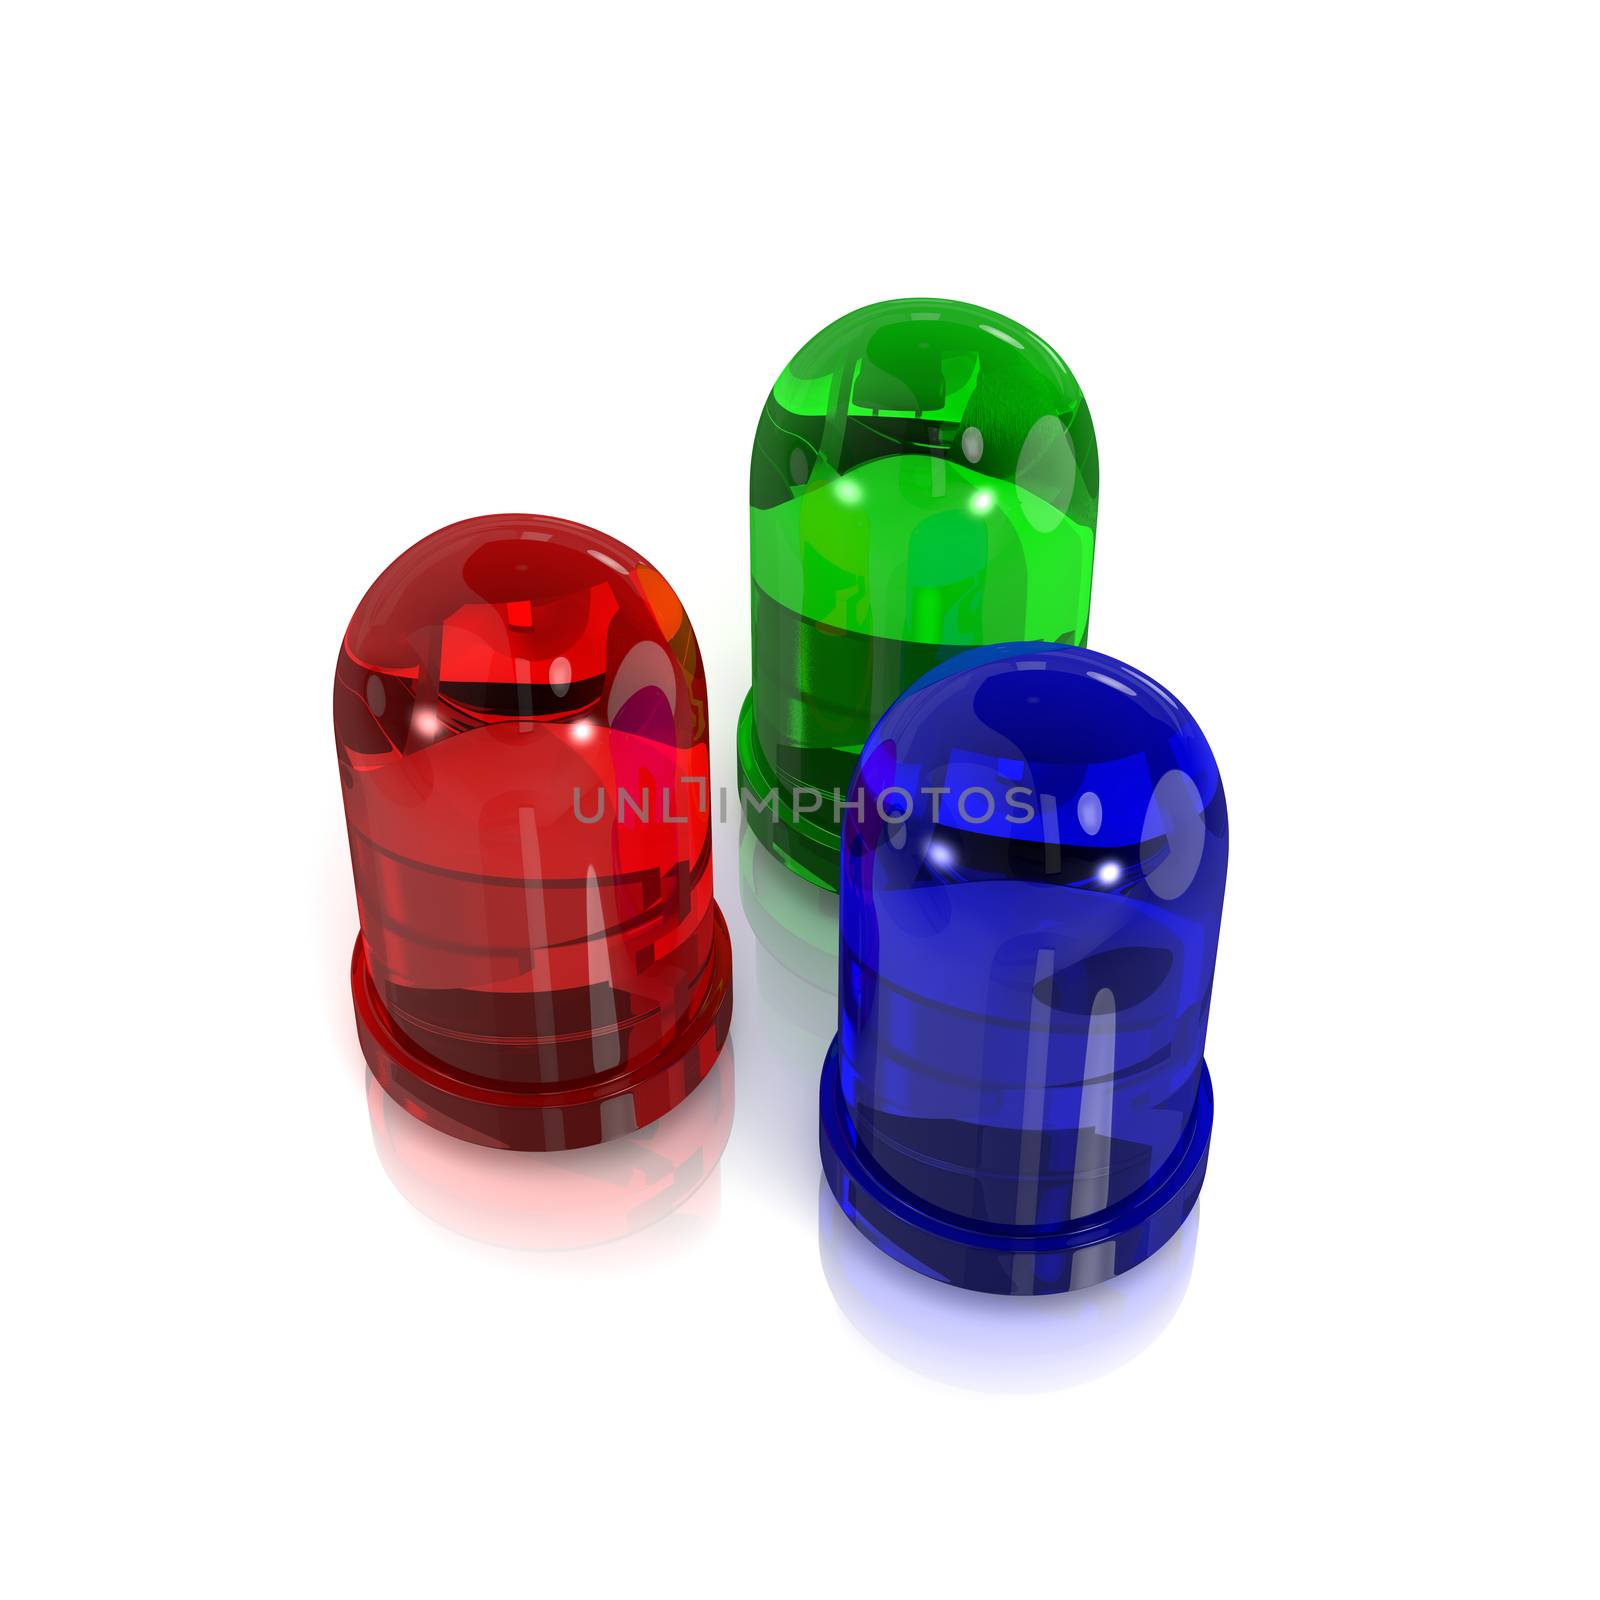 RGB Red, Green and Blue Led Diodes on White Background 3D Illustration